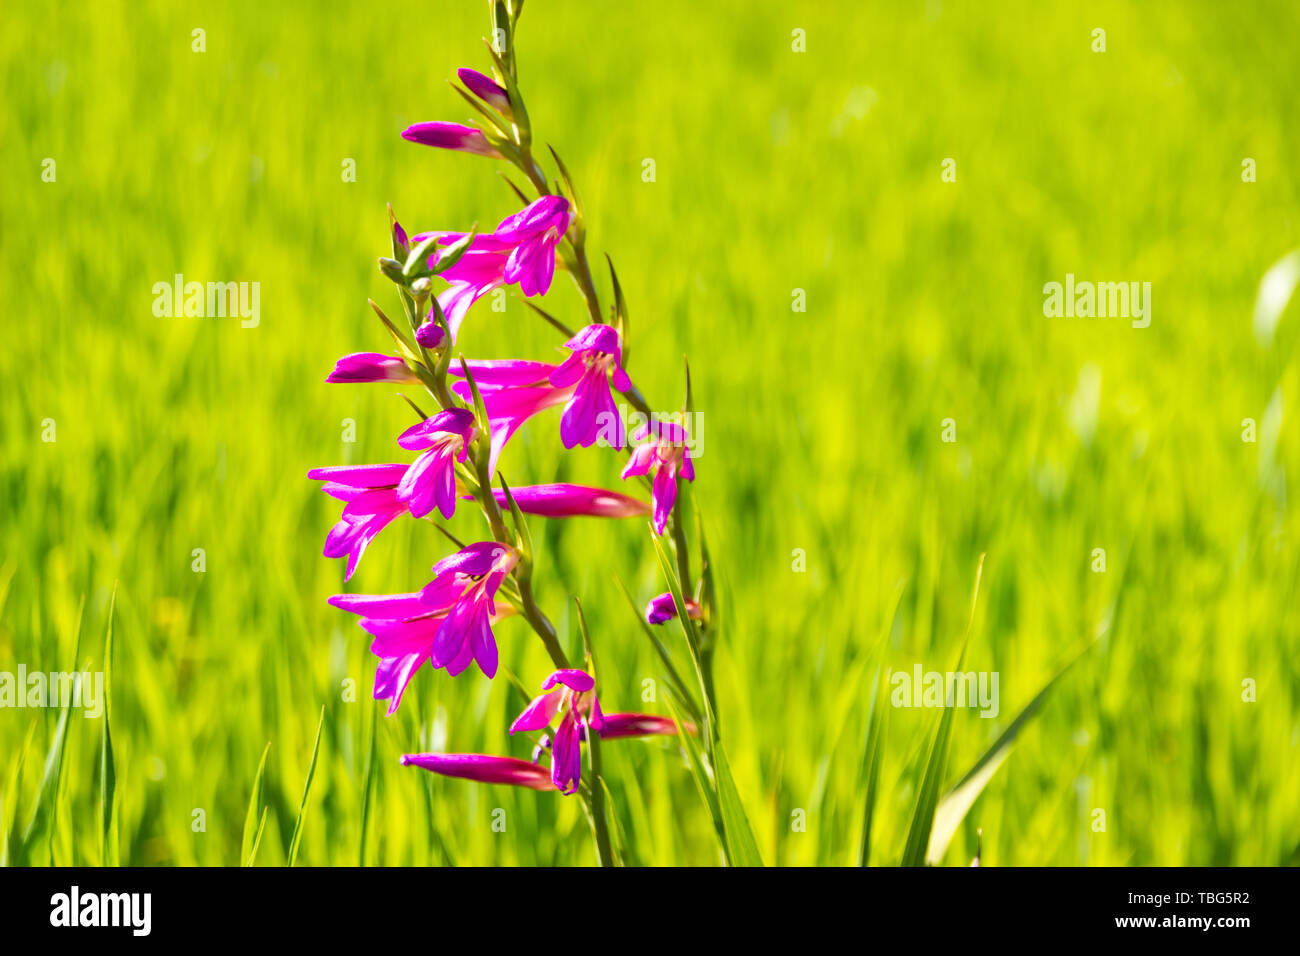 Colorful purple flowers in a grass under the spring sunlight in Italy Stock Photo